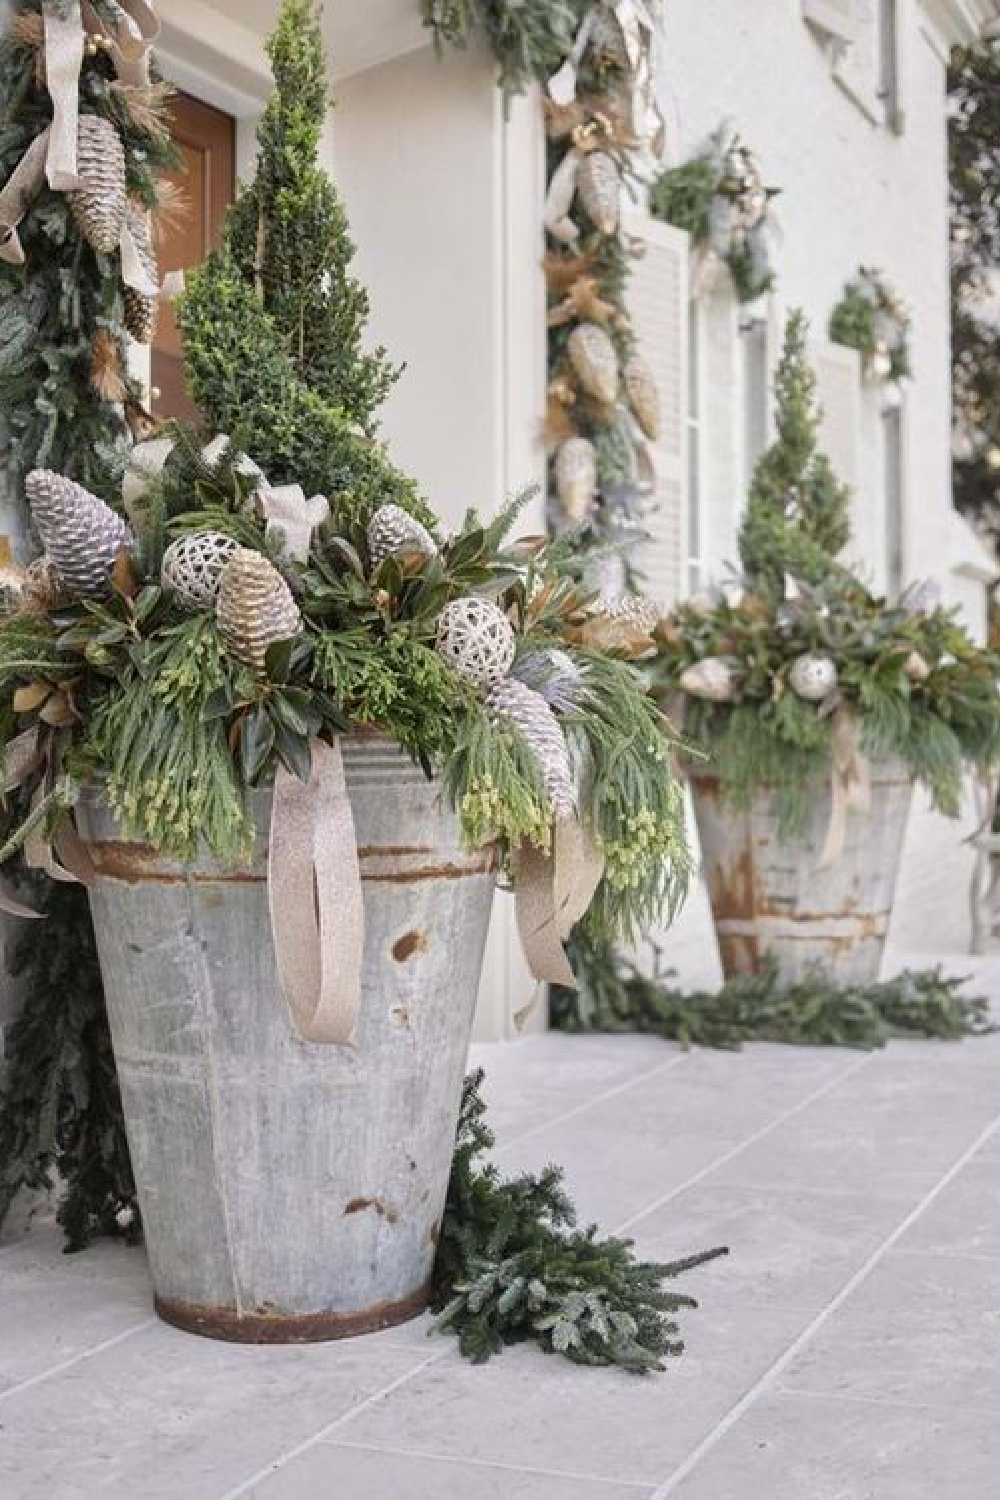 Magnificent Christmas decorated porch with large scale planters, fresh greenery, and ribbon - Home for Holidays Atlanta. #christmasporch #holidayhouse